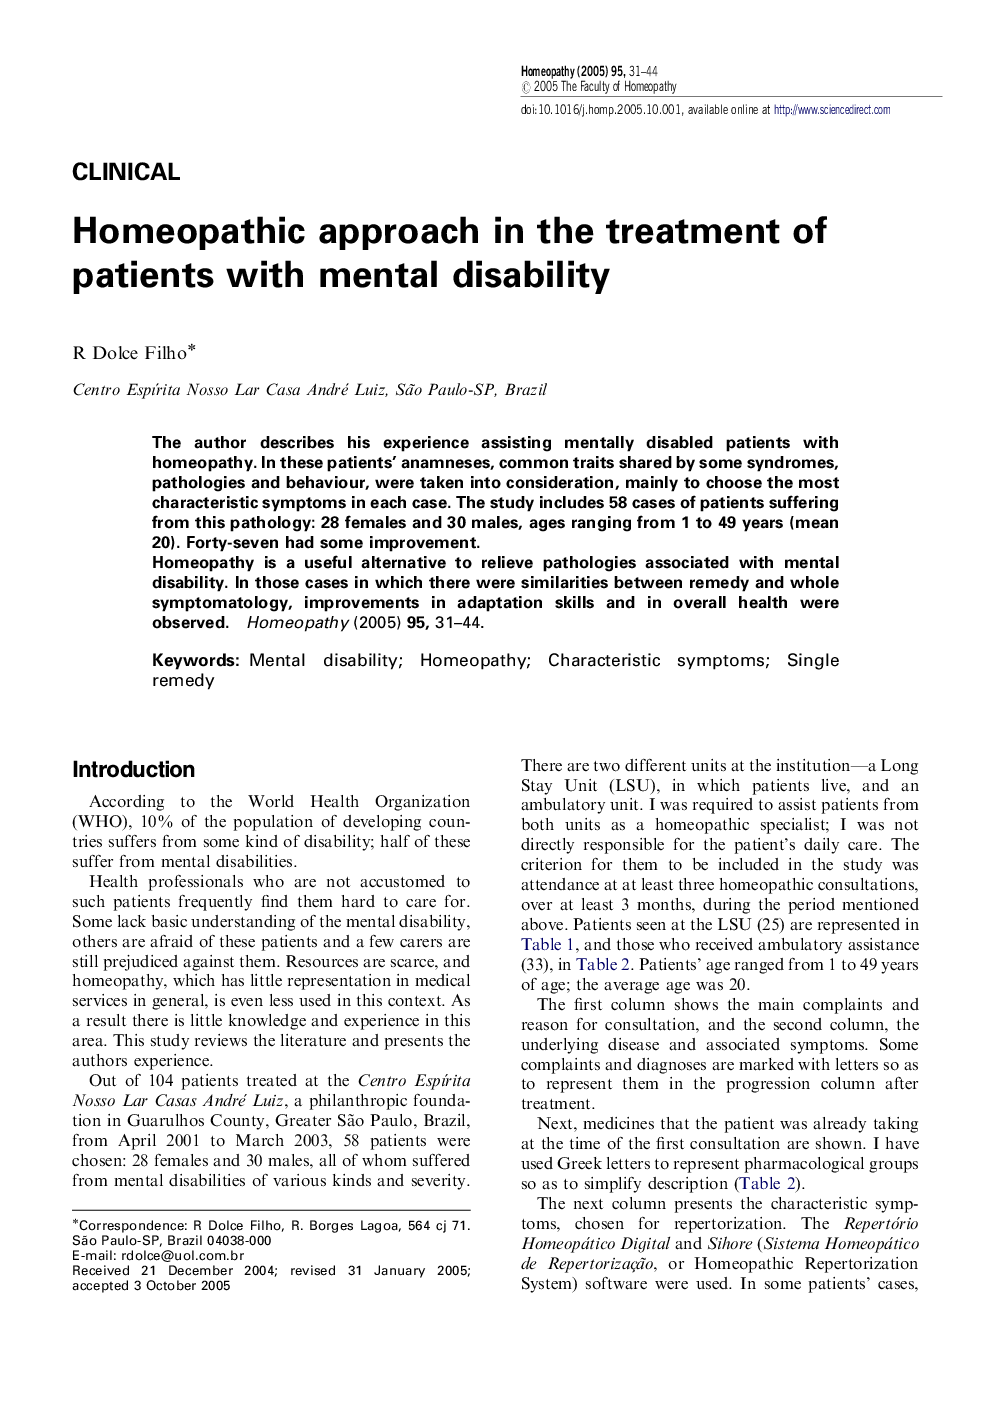 Homeopathic approach in the treatment of patients with mental disability